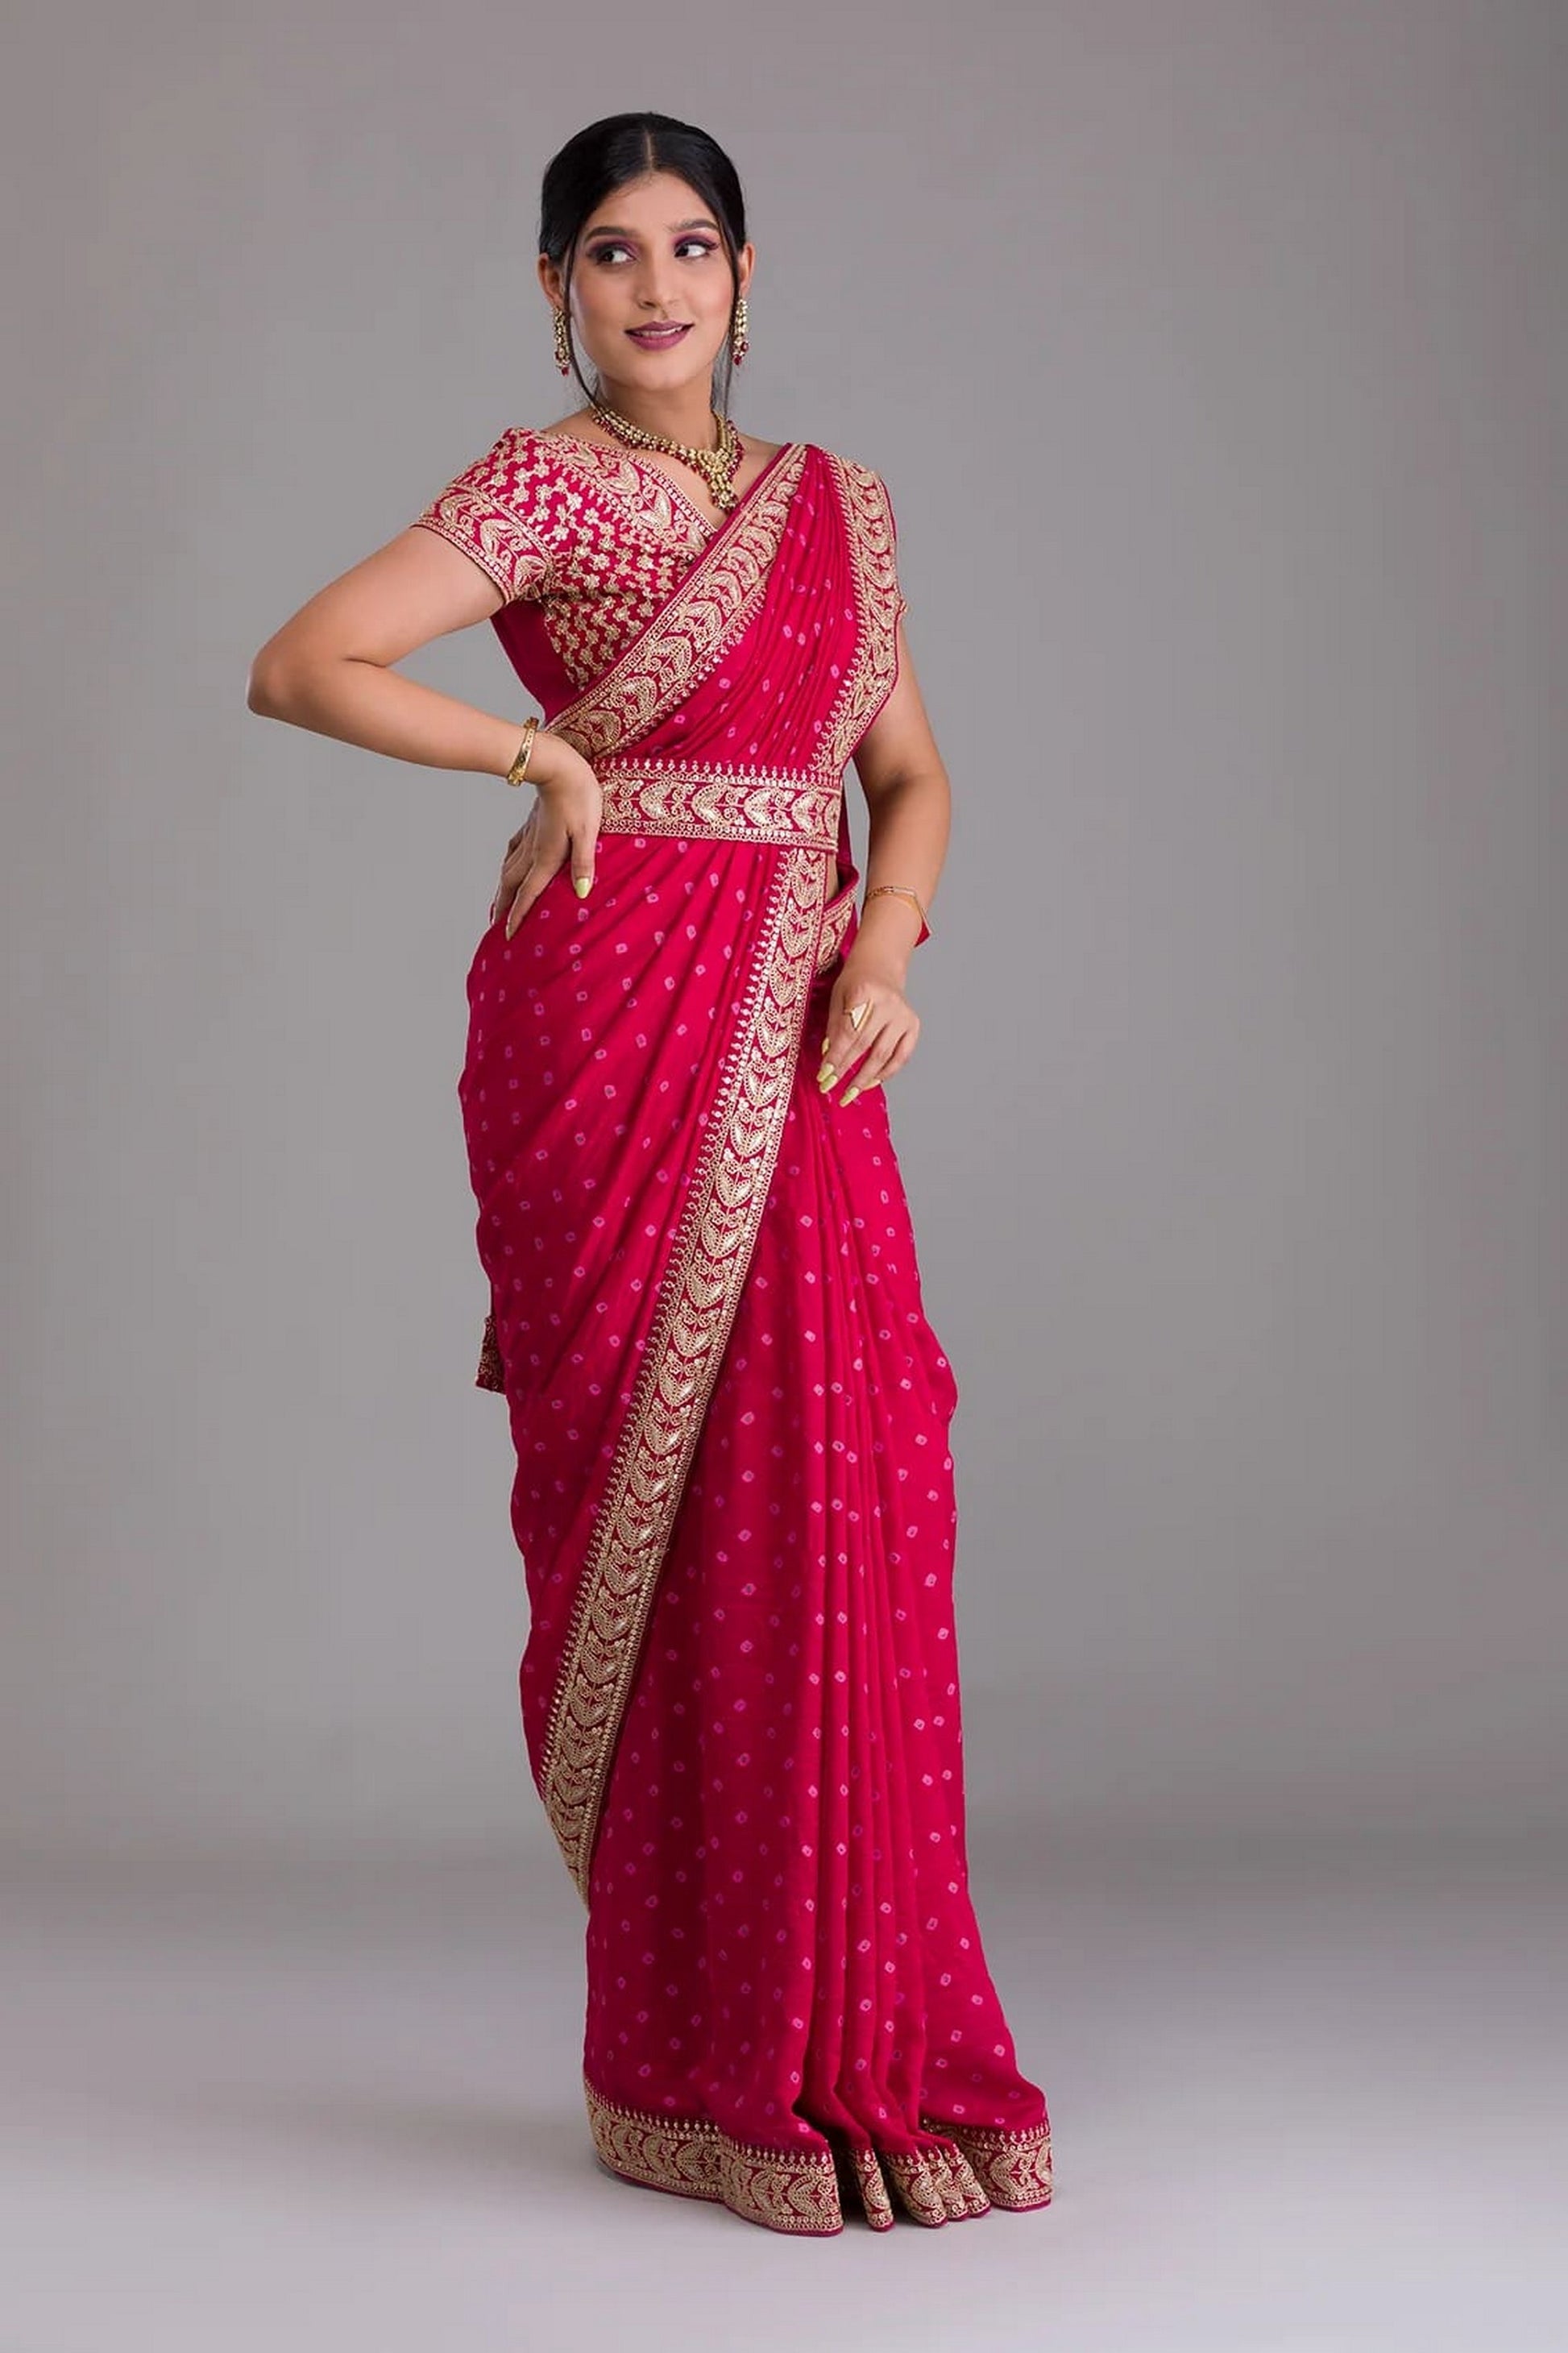 Pink Indian Georgette Saree For Indian Festivals & Weddings - Sequence Embroidery Work, Dori Work